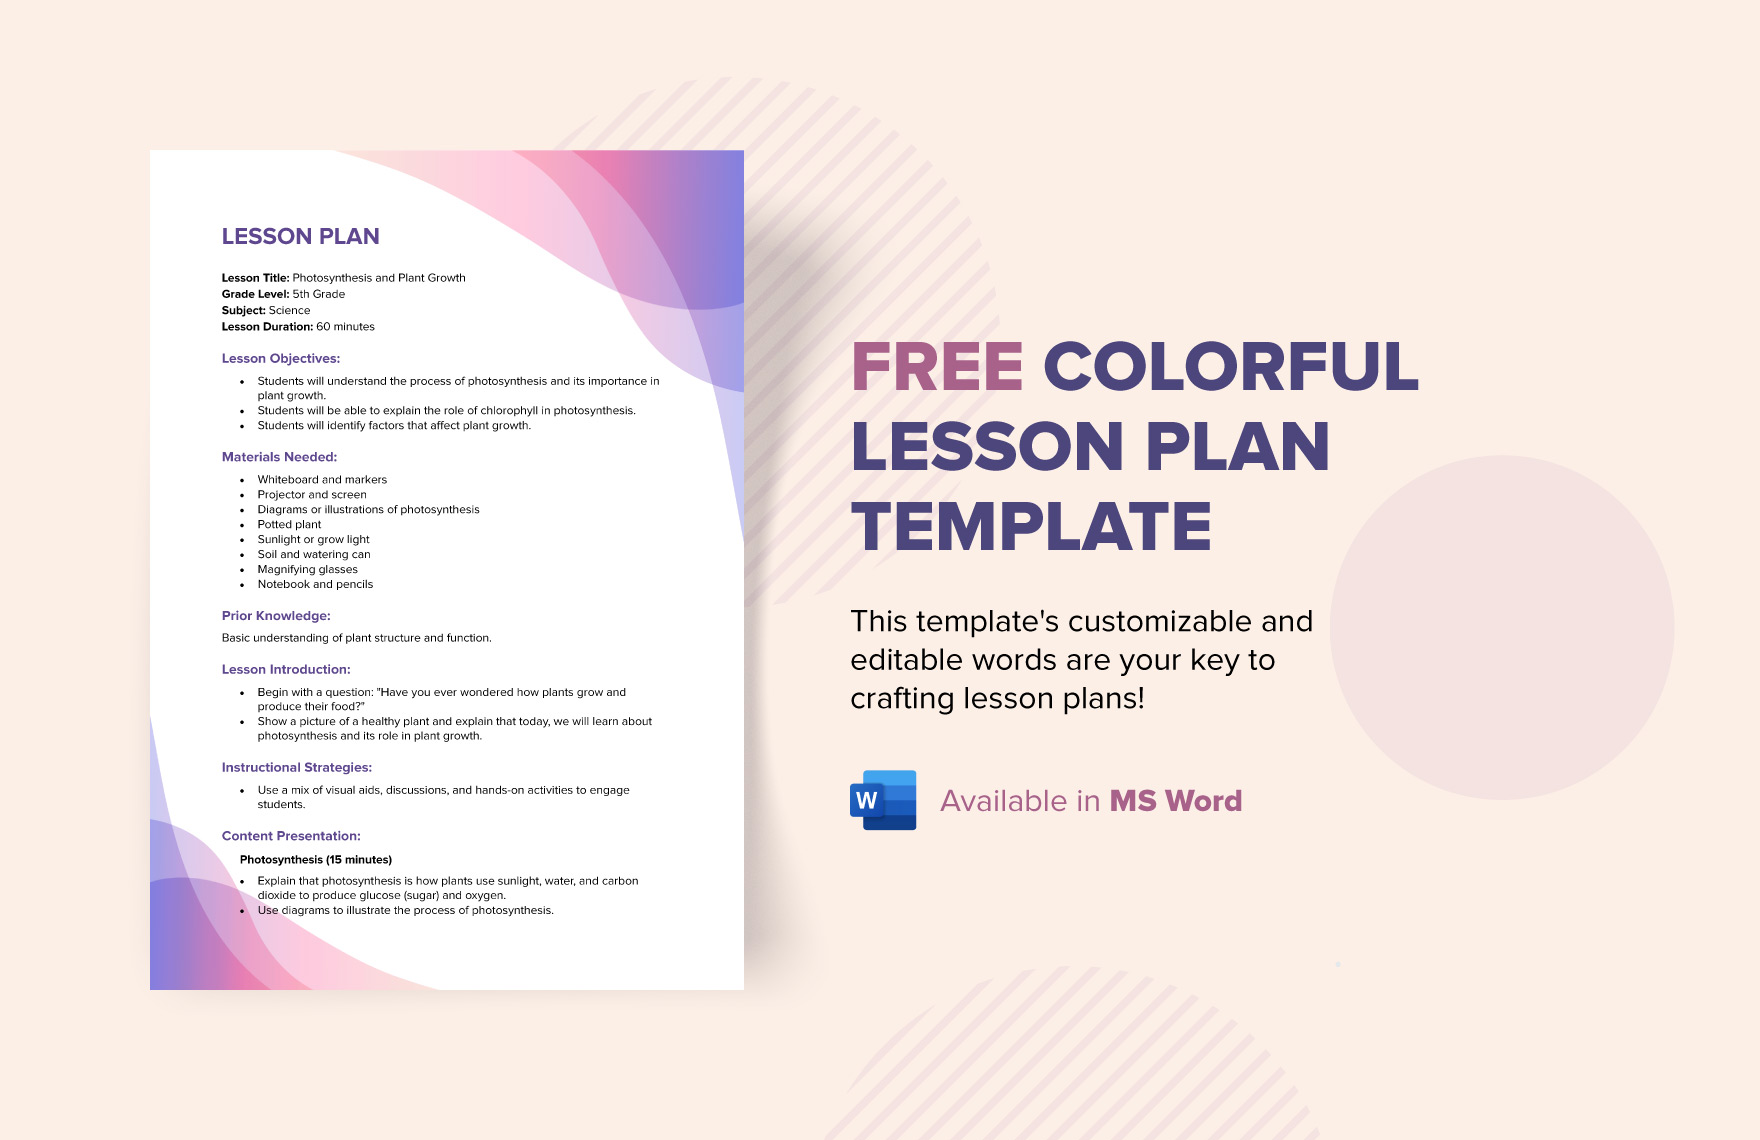 Free Colorful Lesson Plan Template